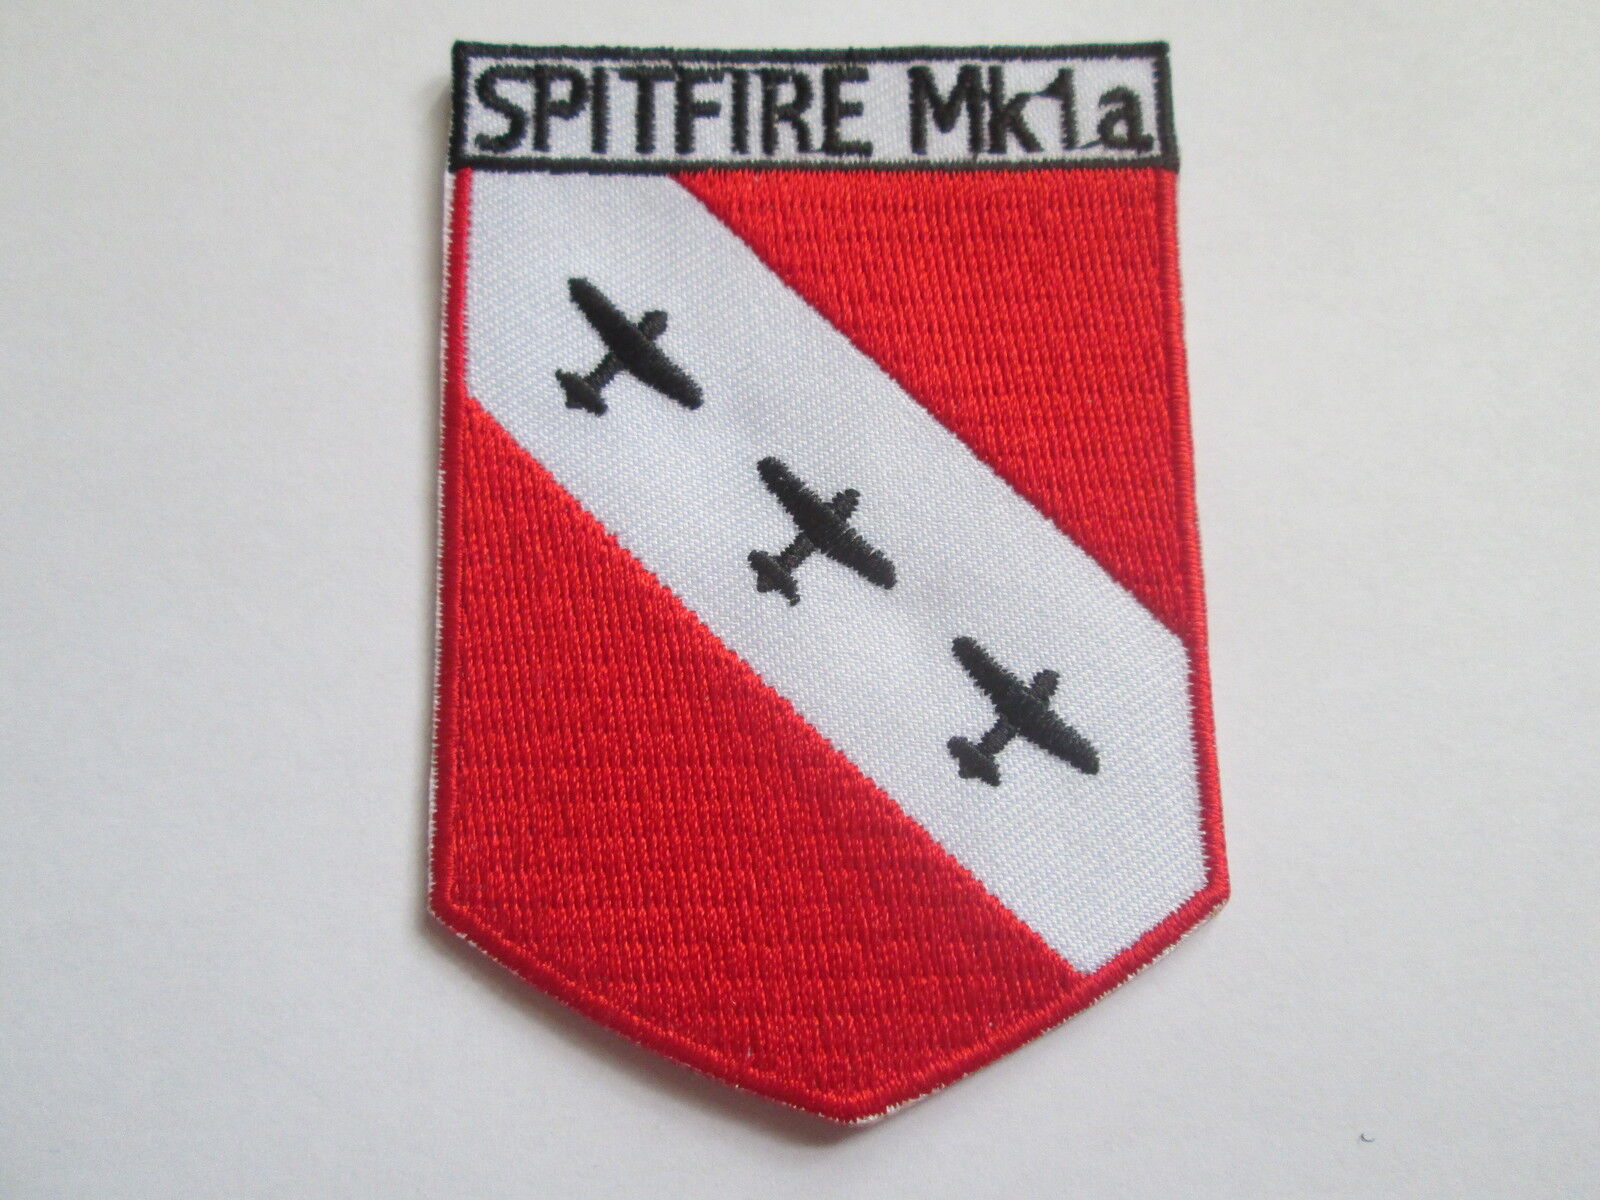 Spitfire MK1a Embroidered Iron or Sew on Patch P037